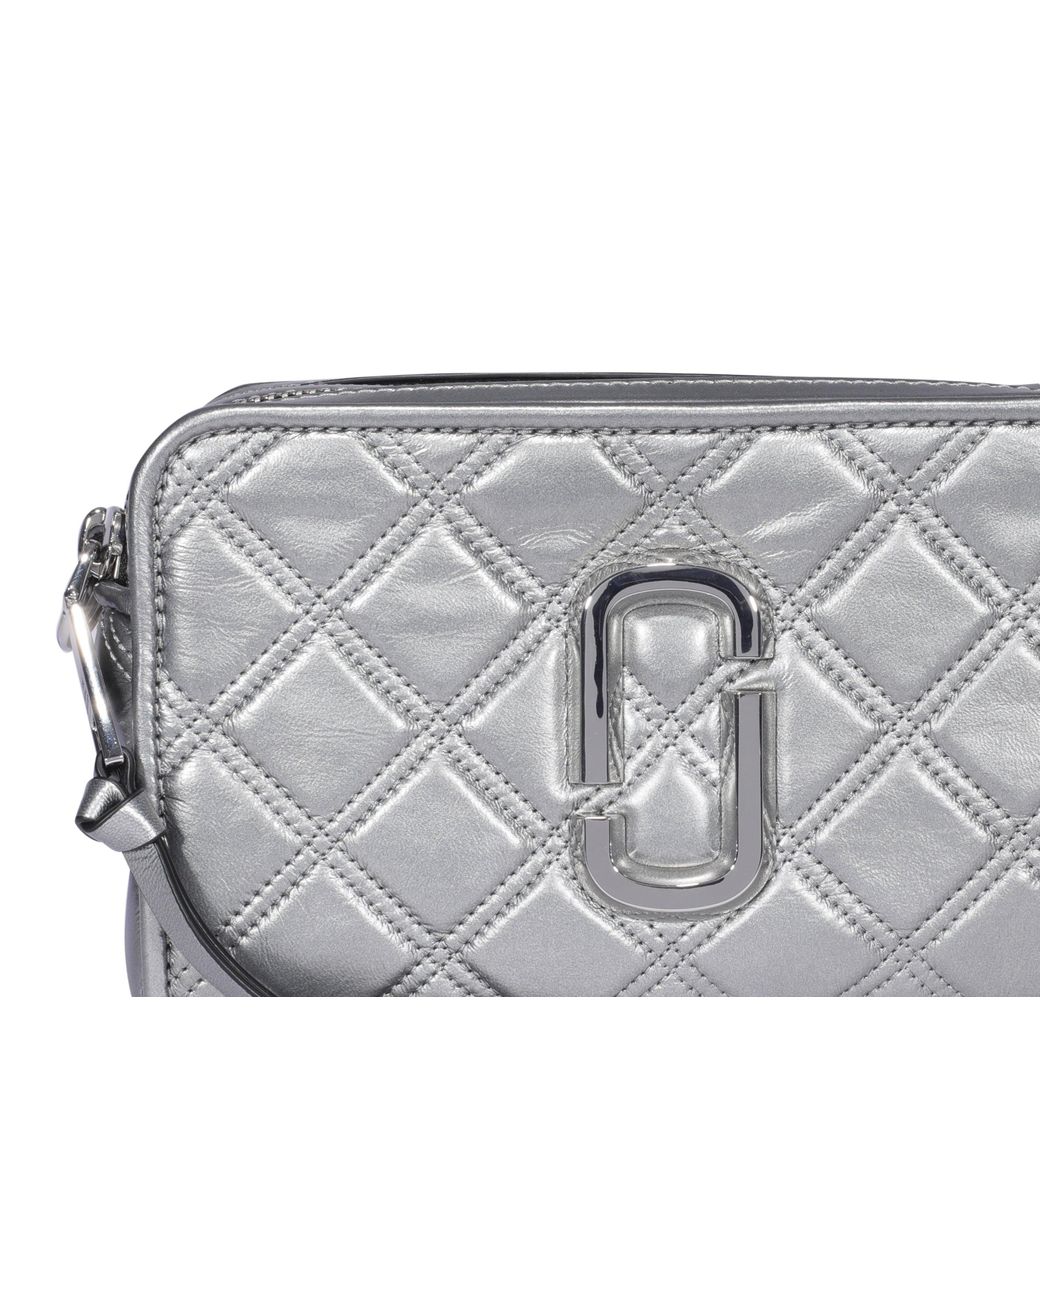 THE Quilted Softshot 21 Marc Jacobs in Blue Mist  Marc jacobs crossbody  bag, Marc jacobs, Marc jacobs bag